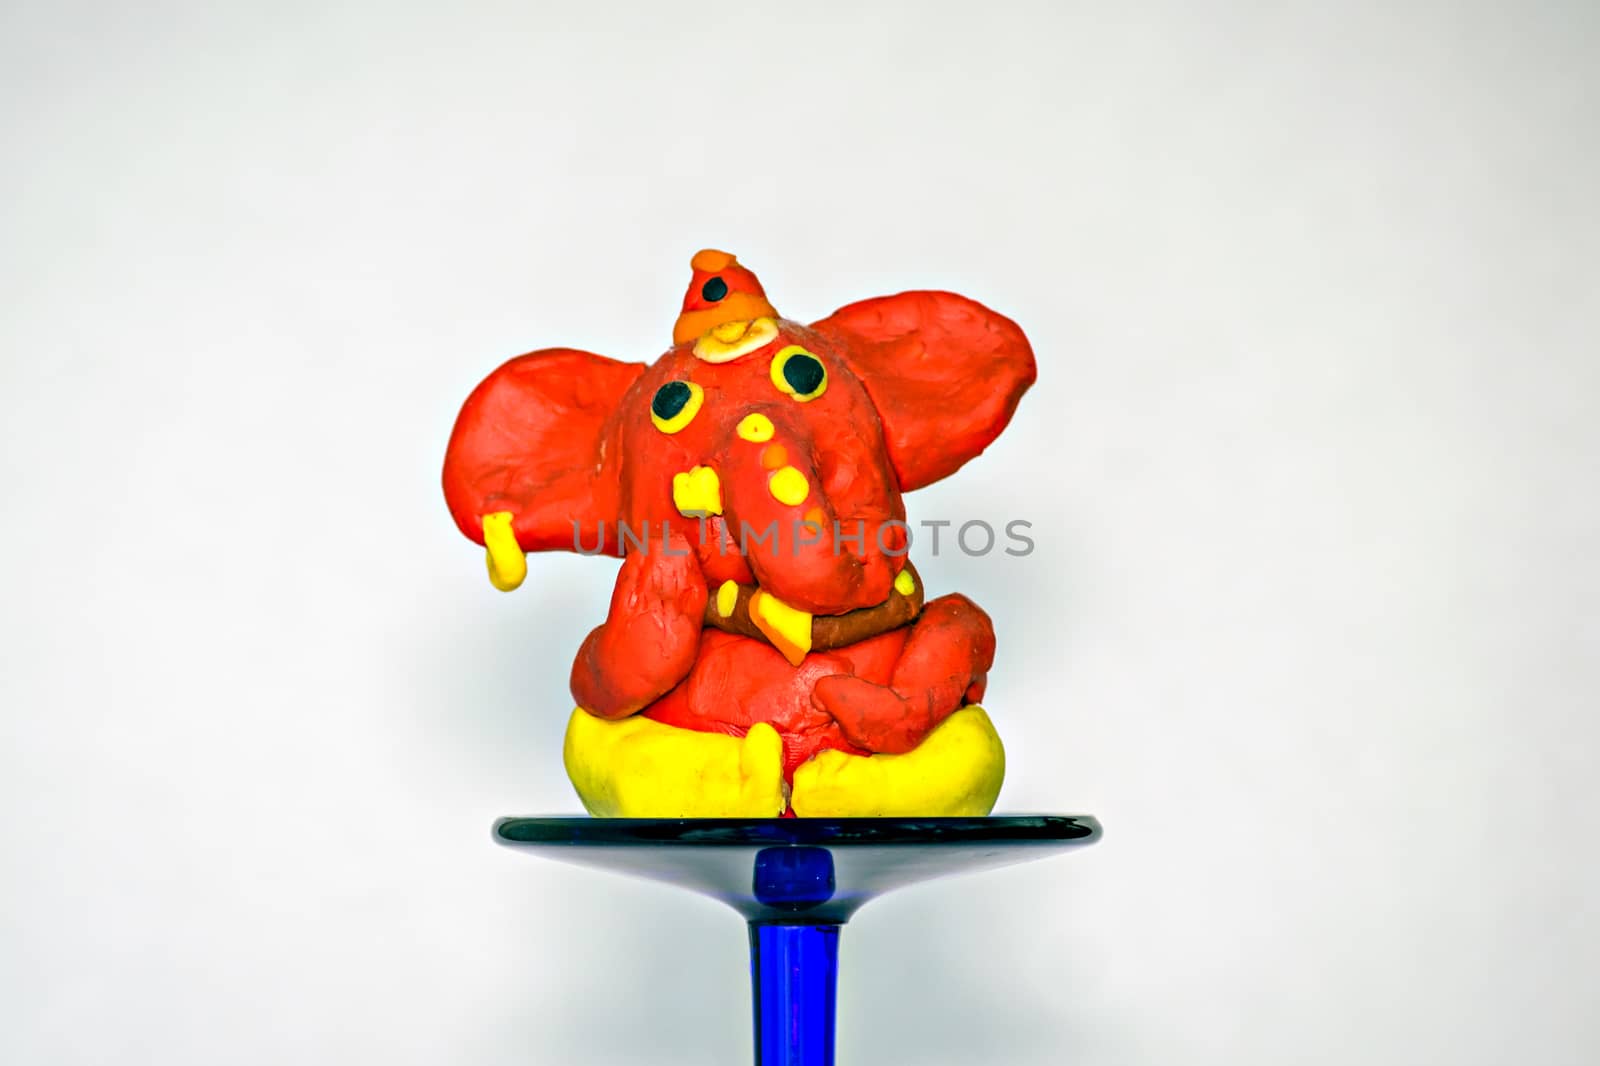 Colorful,home made,clay idol of Lord Ganesha for upcoming Ganesha festival. by lalam